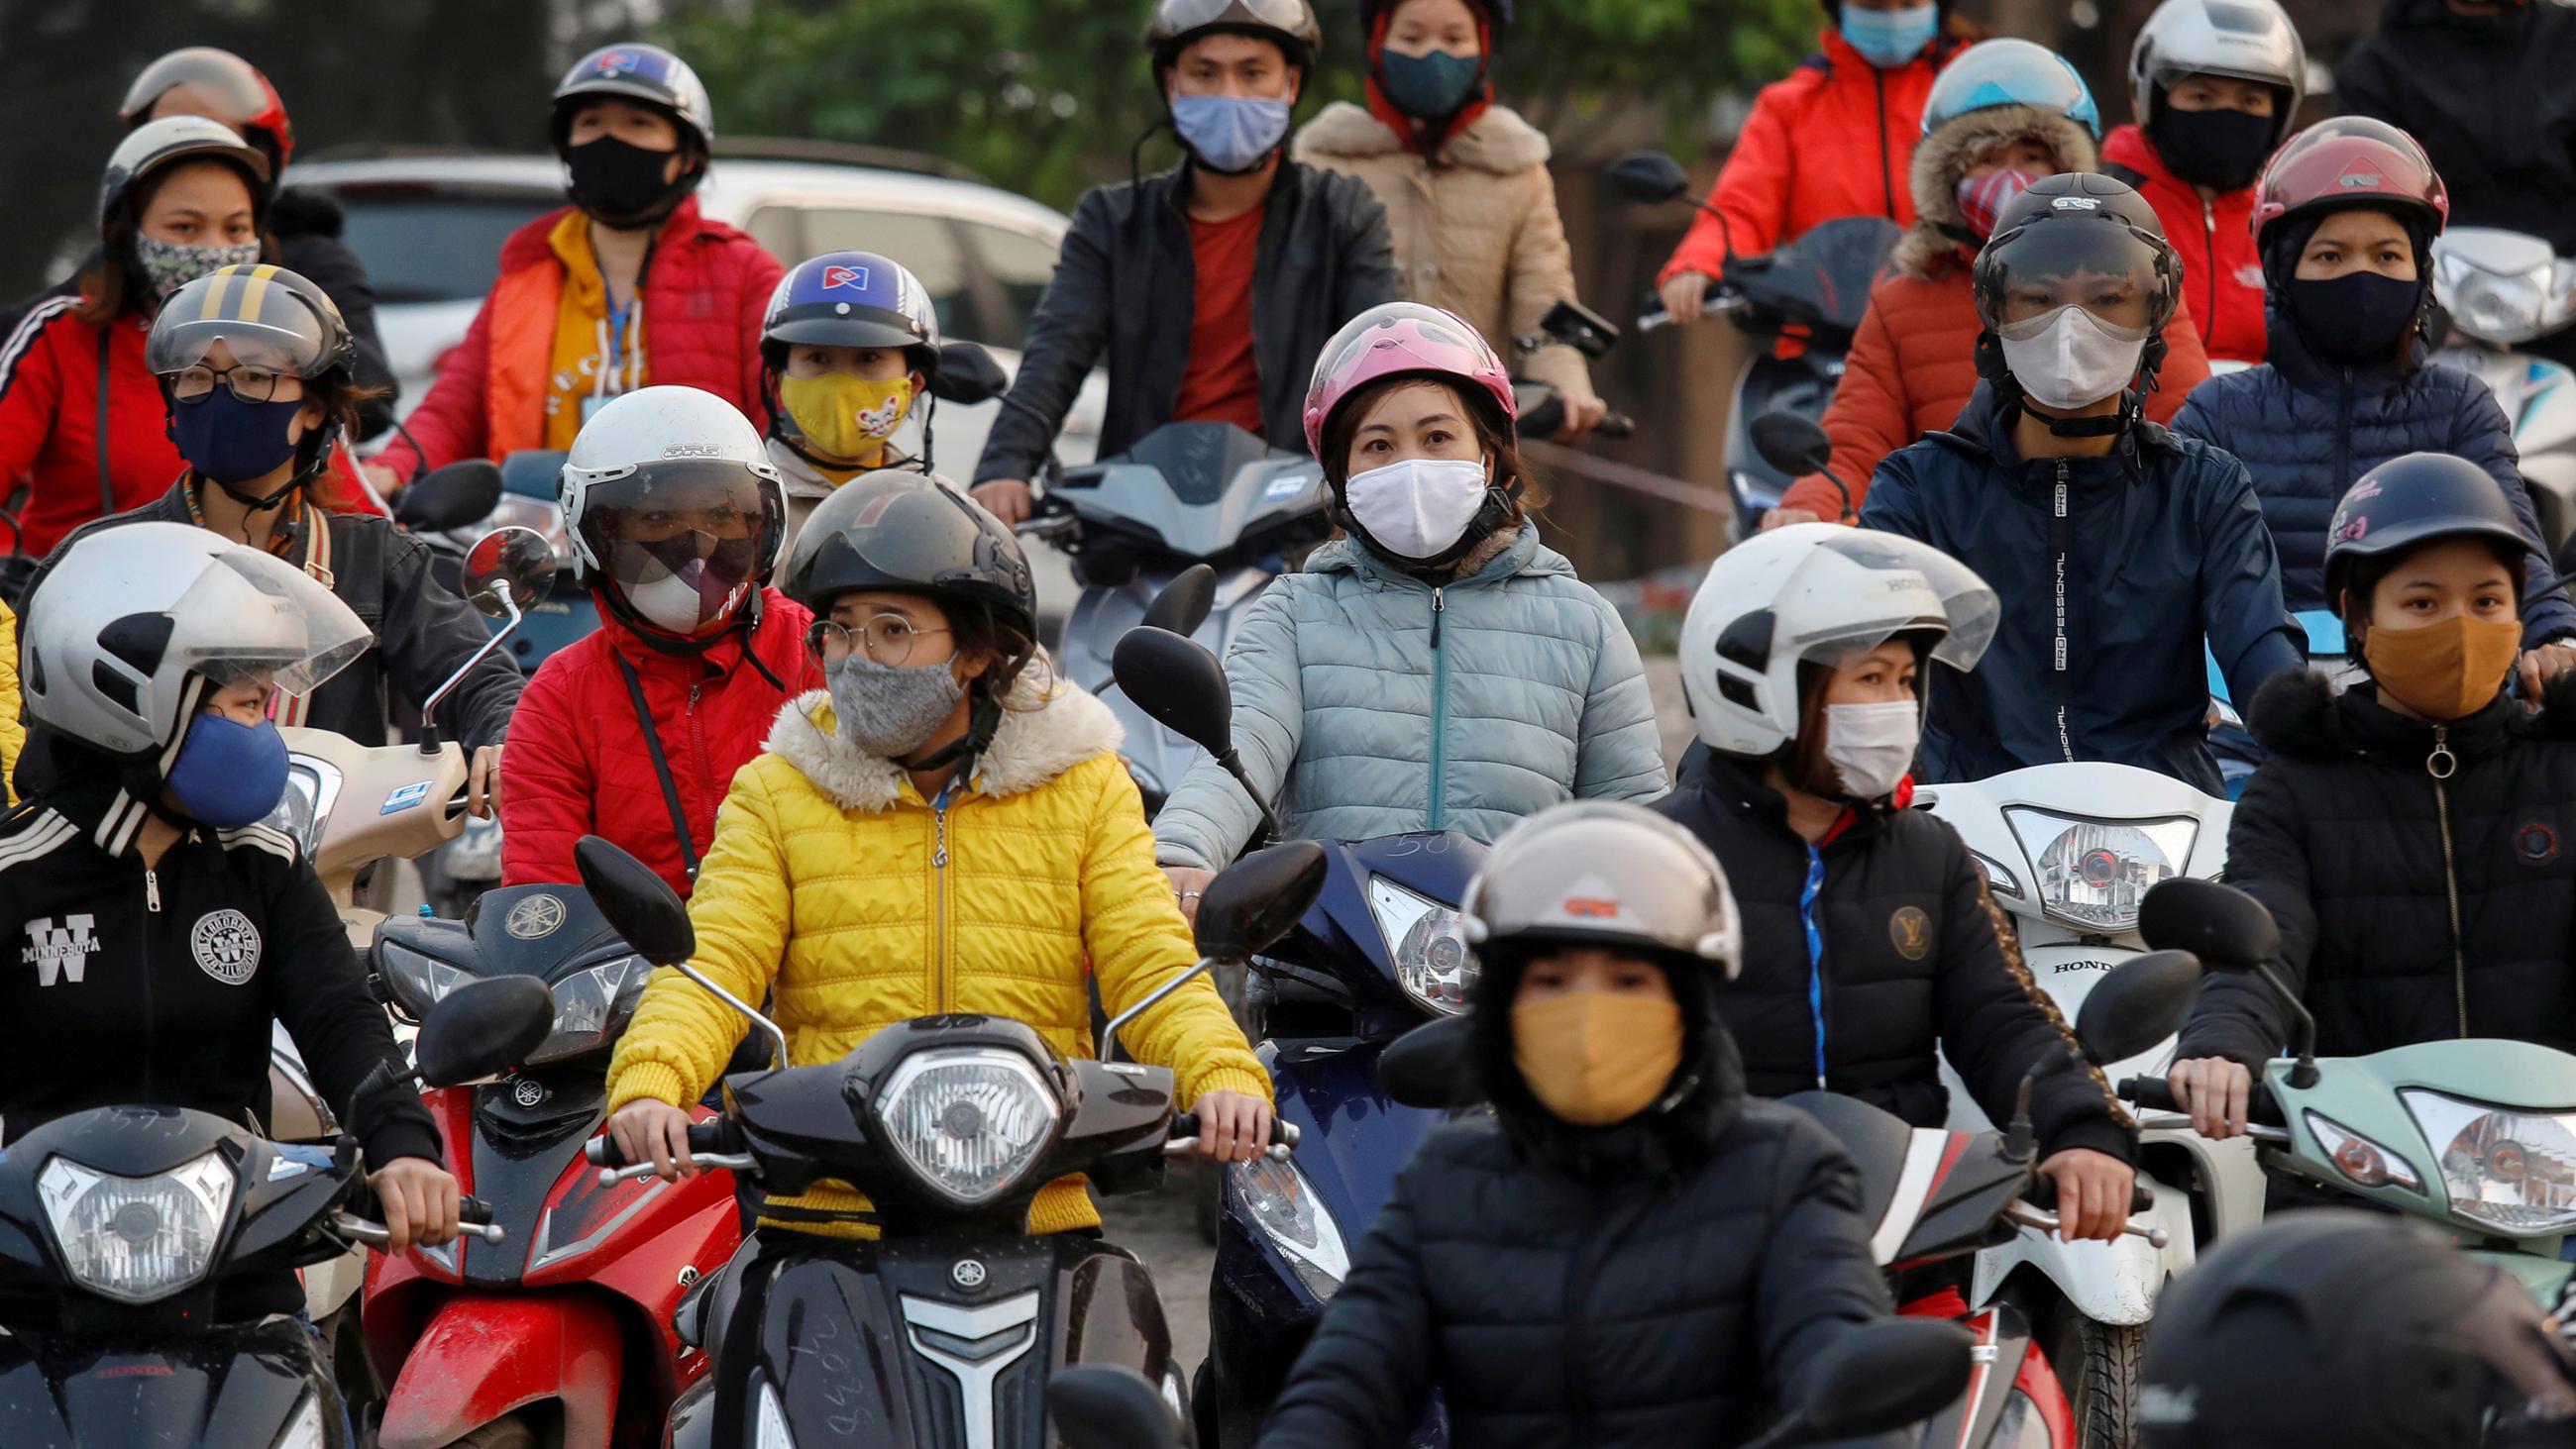 Laborers wearing protective masks gather while they wait for a ferry on the way home after work during the coronavirus outbreak in Hai Duong province, Vietnam, on April 7, 2020. The image shows a number of people on motorcycles wearing masks. 